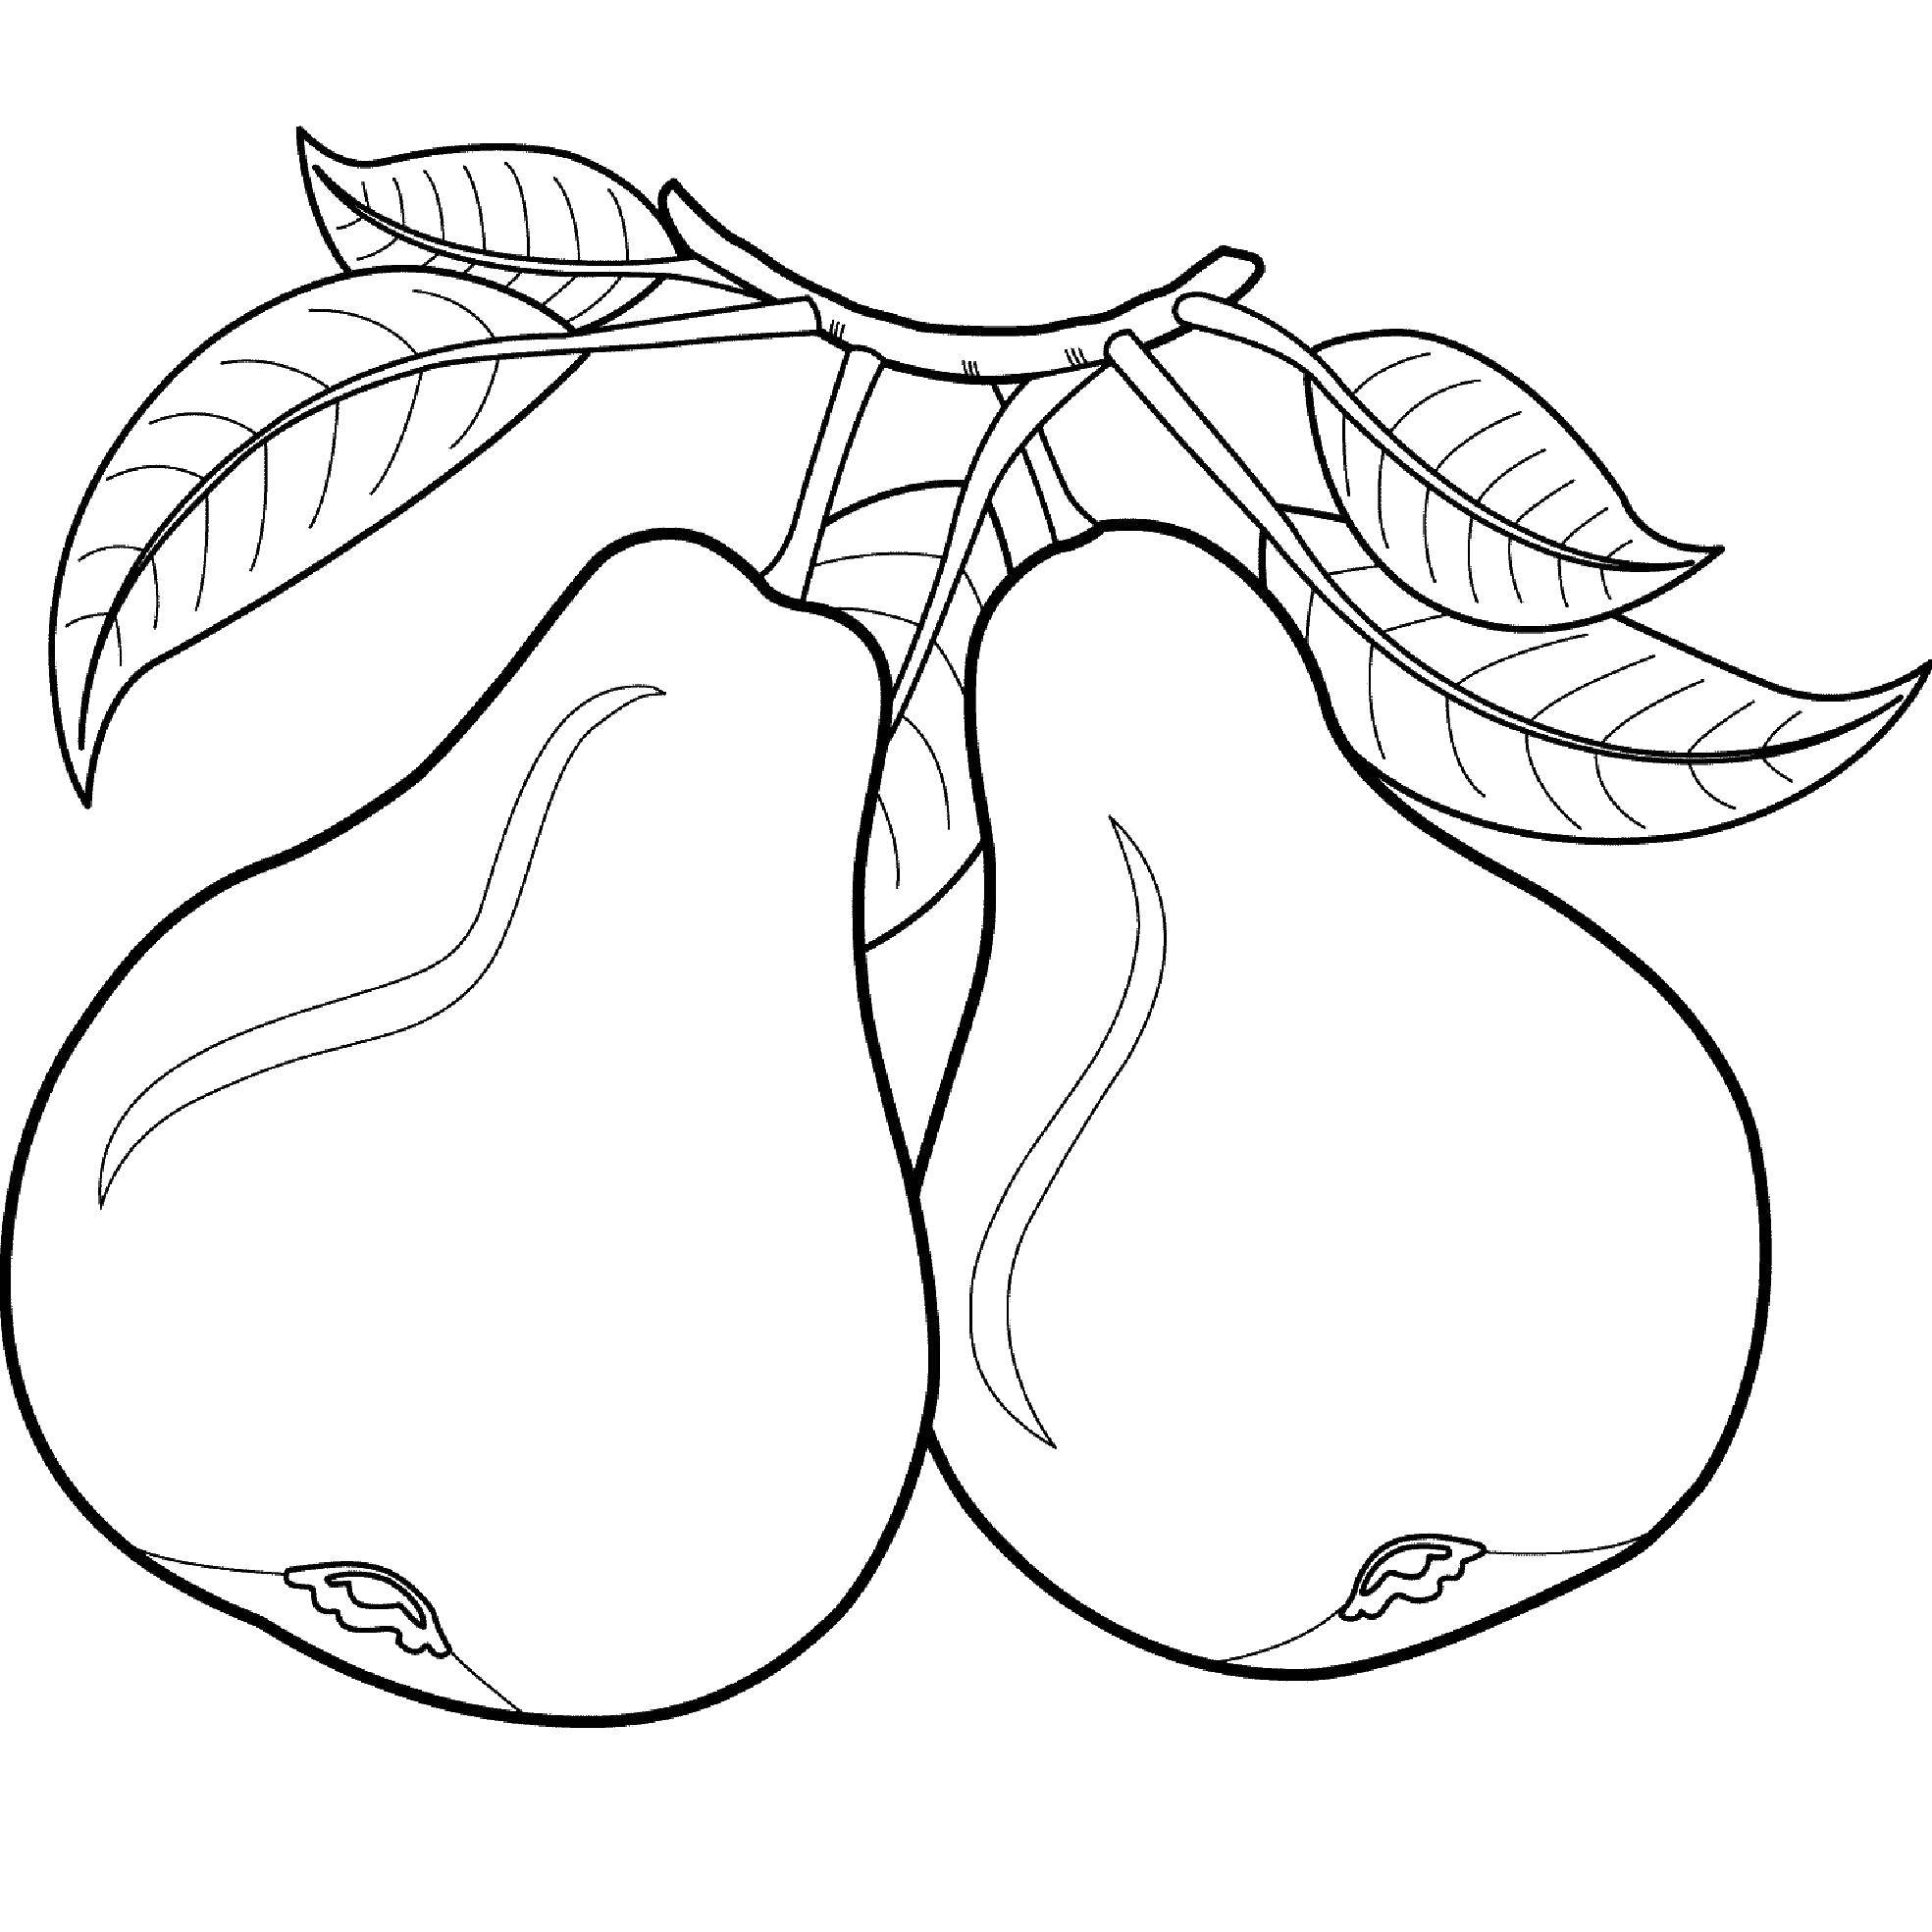 Coloring Pear. Category fruits. Tags:  pears, fruit.